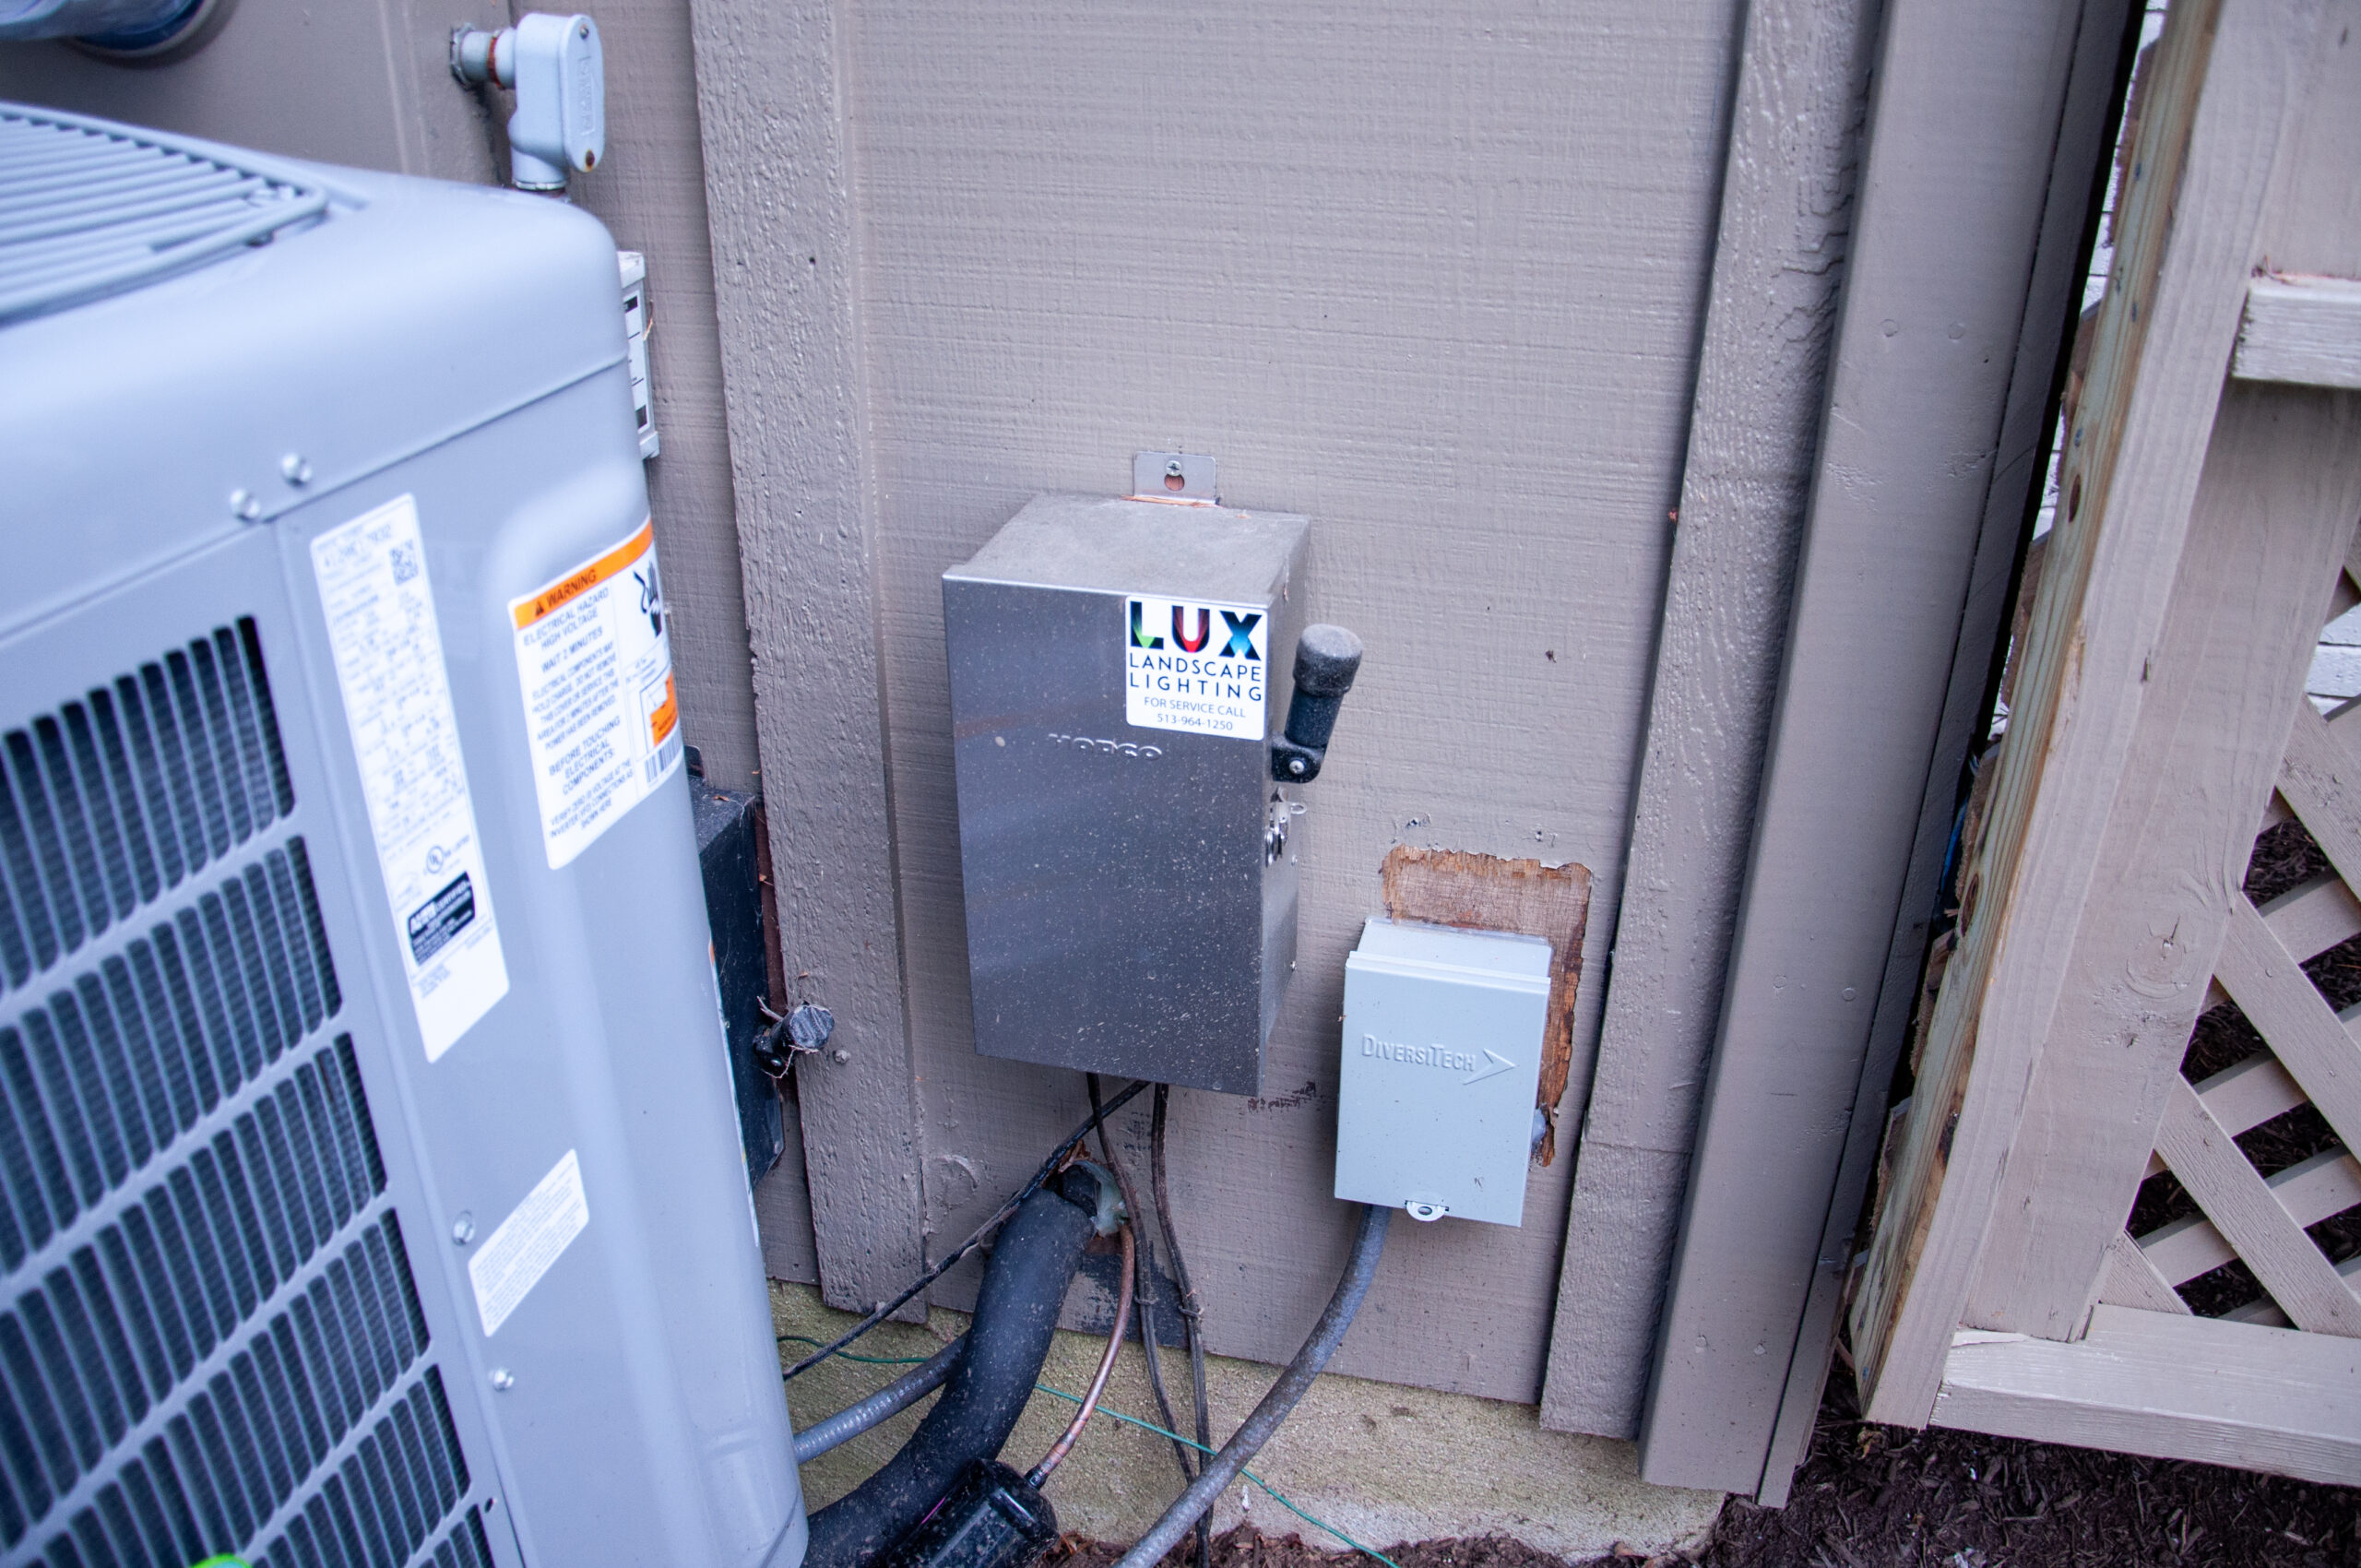 Outdoor Lighting Transformers: How to Do it Right